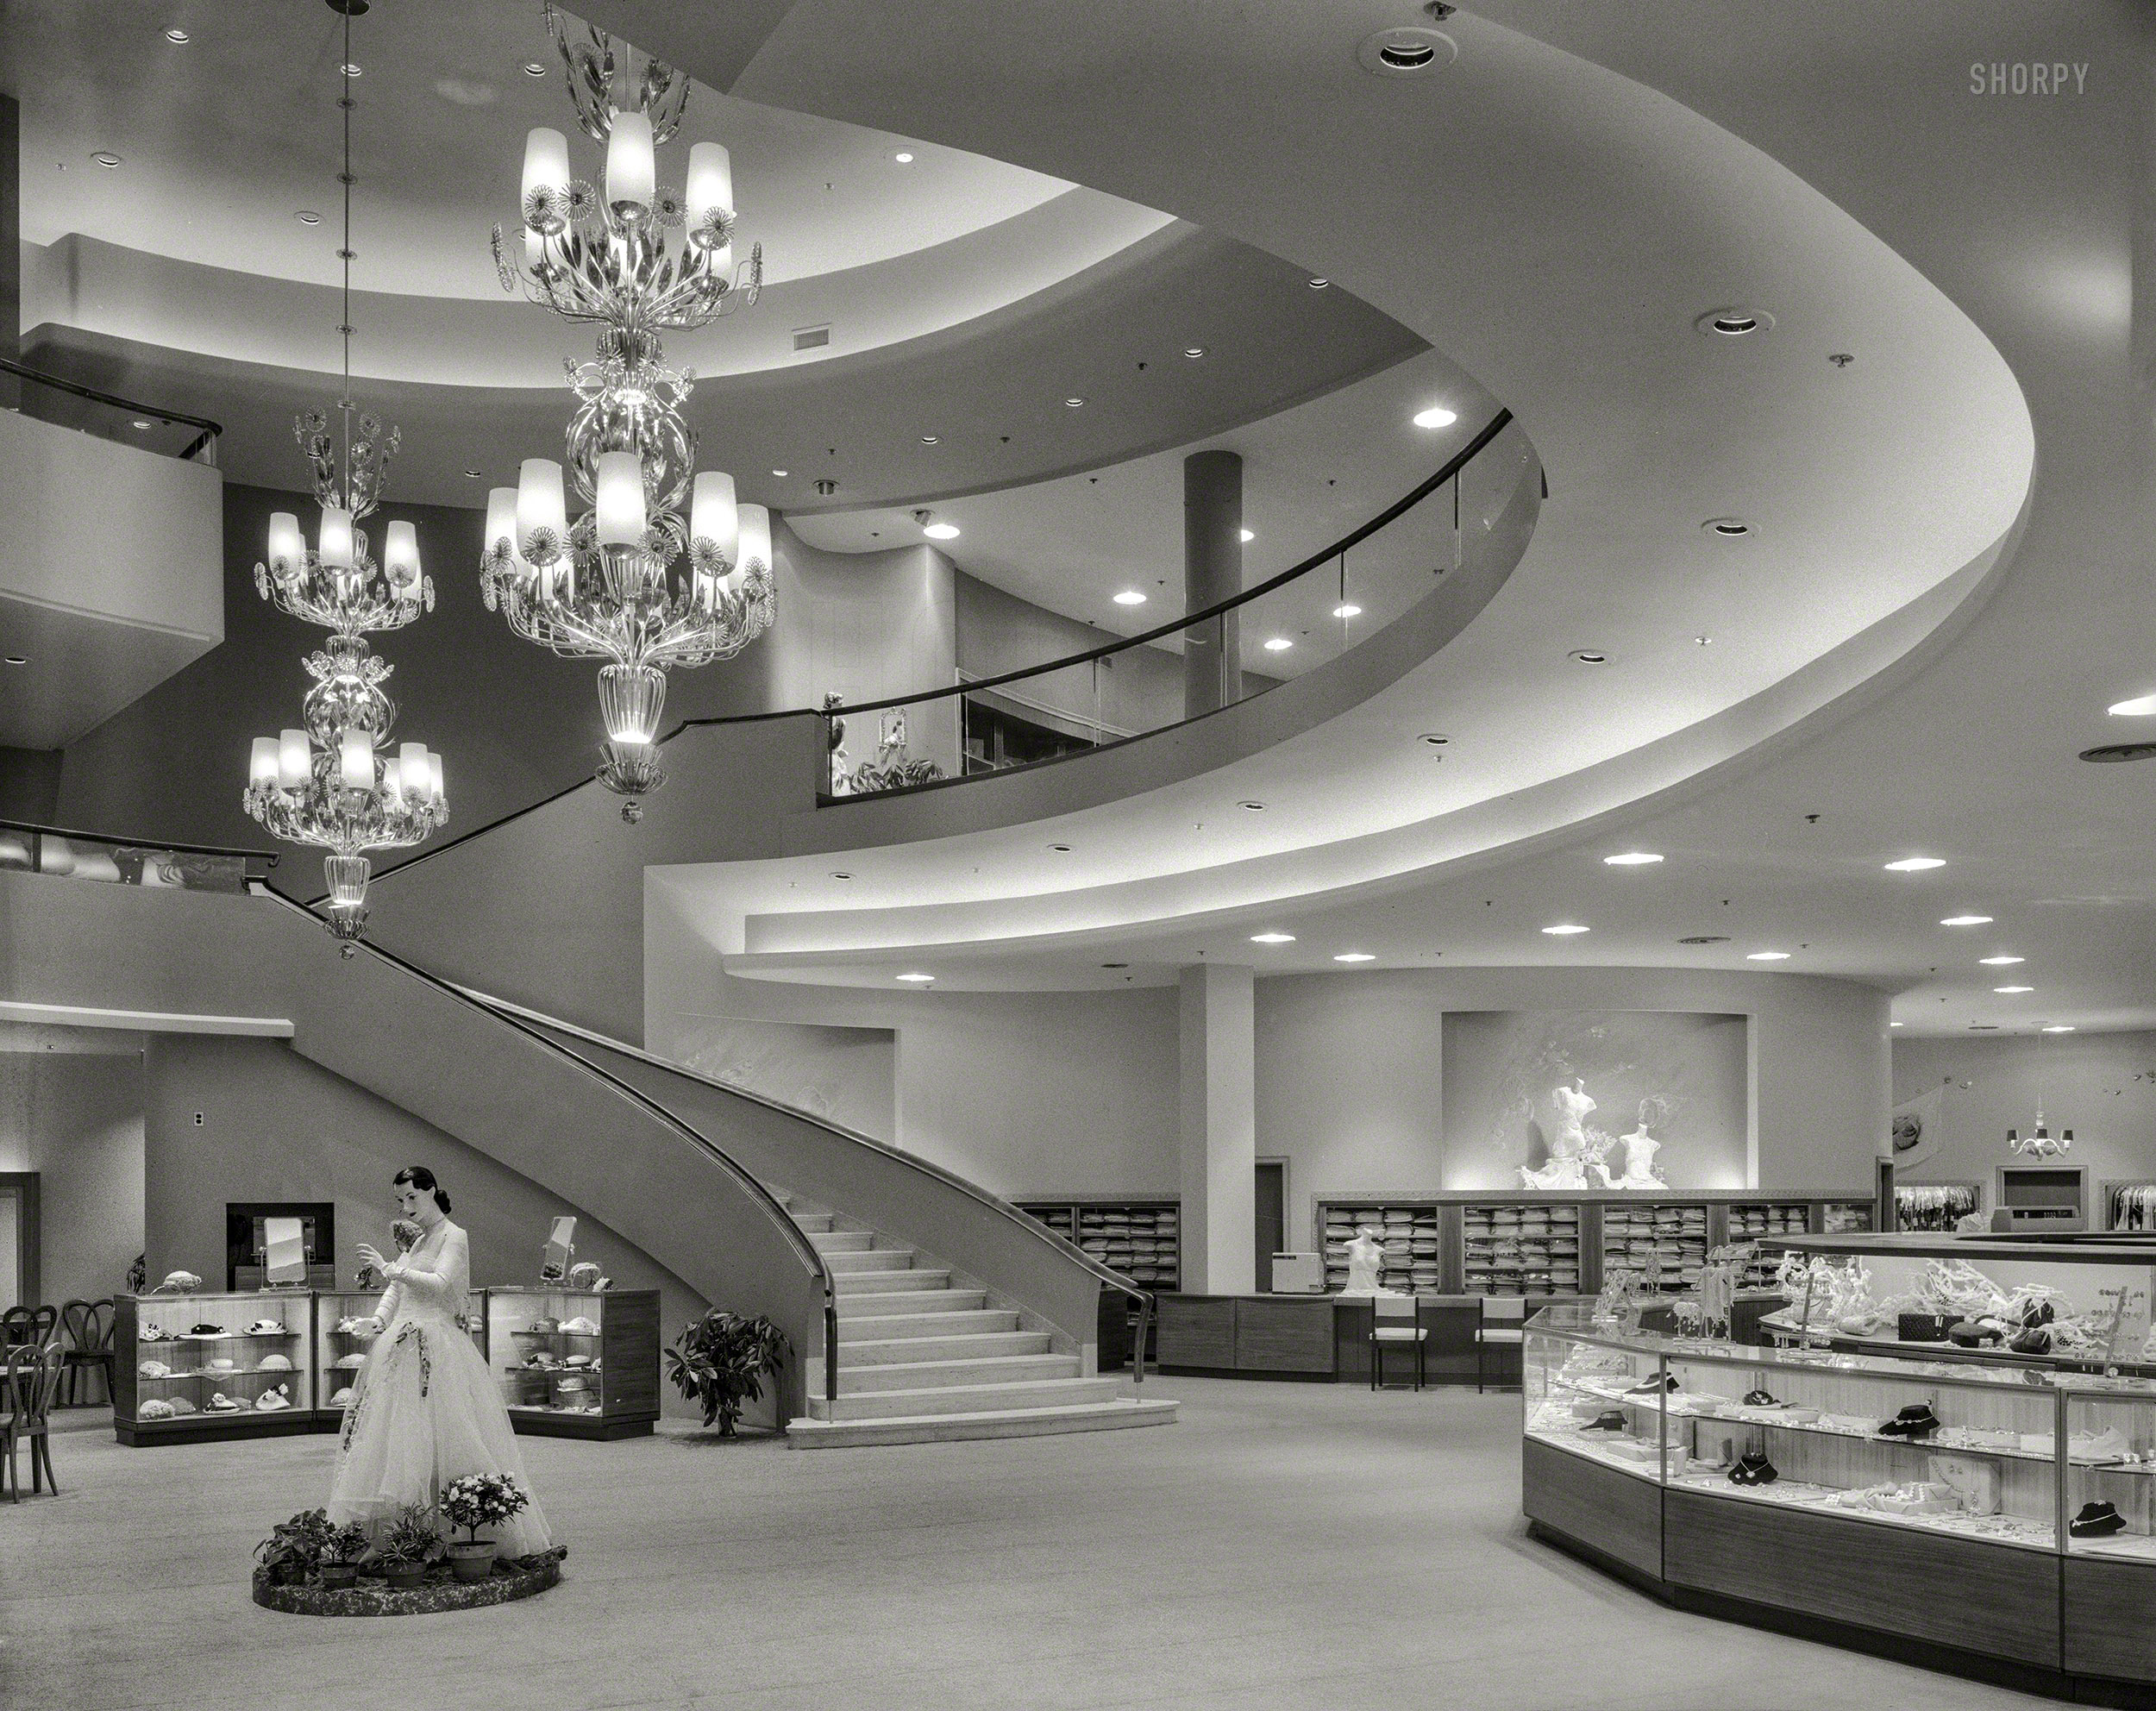 February 16, 1951. "Hahne & Co. department store in Montclair, New Jersey. Staircase II. Fellheimer & Wagner, client." 4x5 acetate negative. View full size.